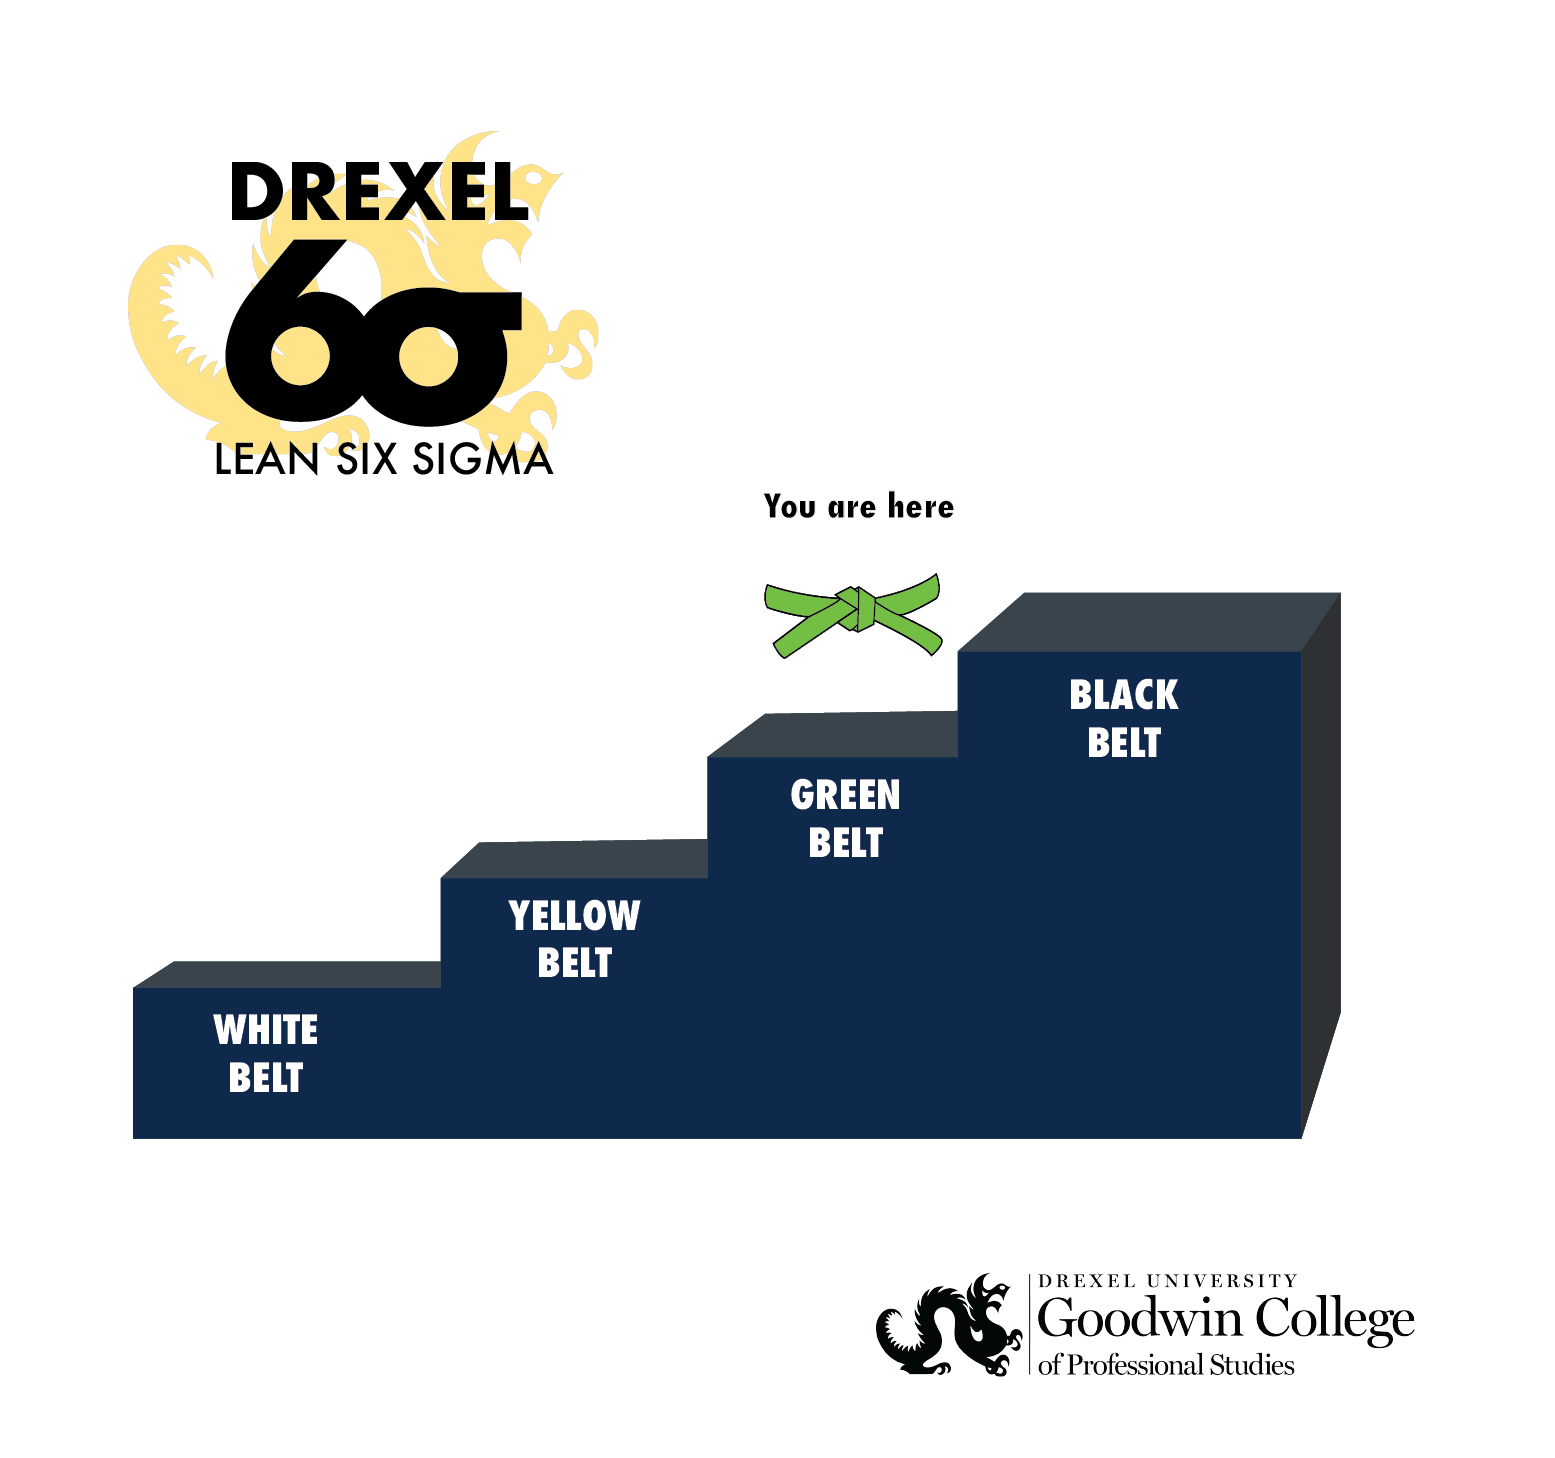 Lean Six Sigma Ladder with "You are Here" on Green Belt step